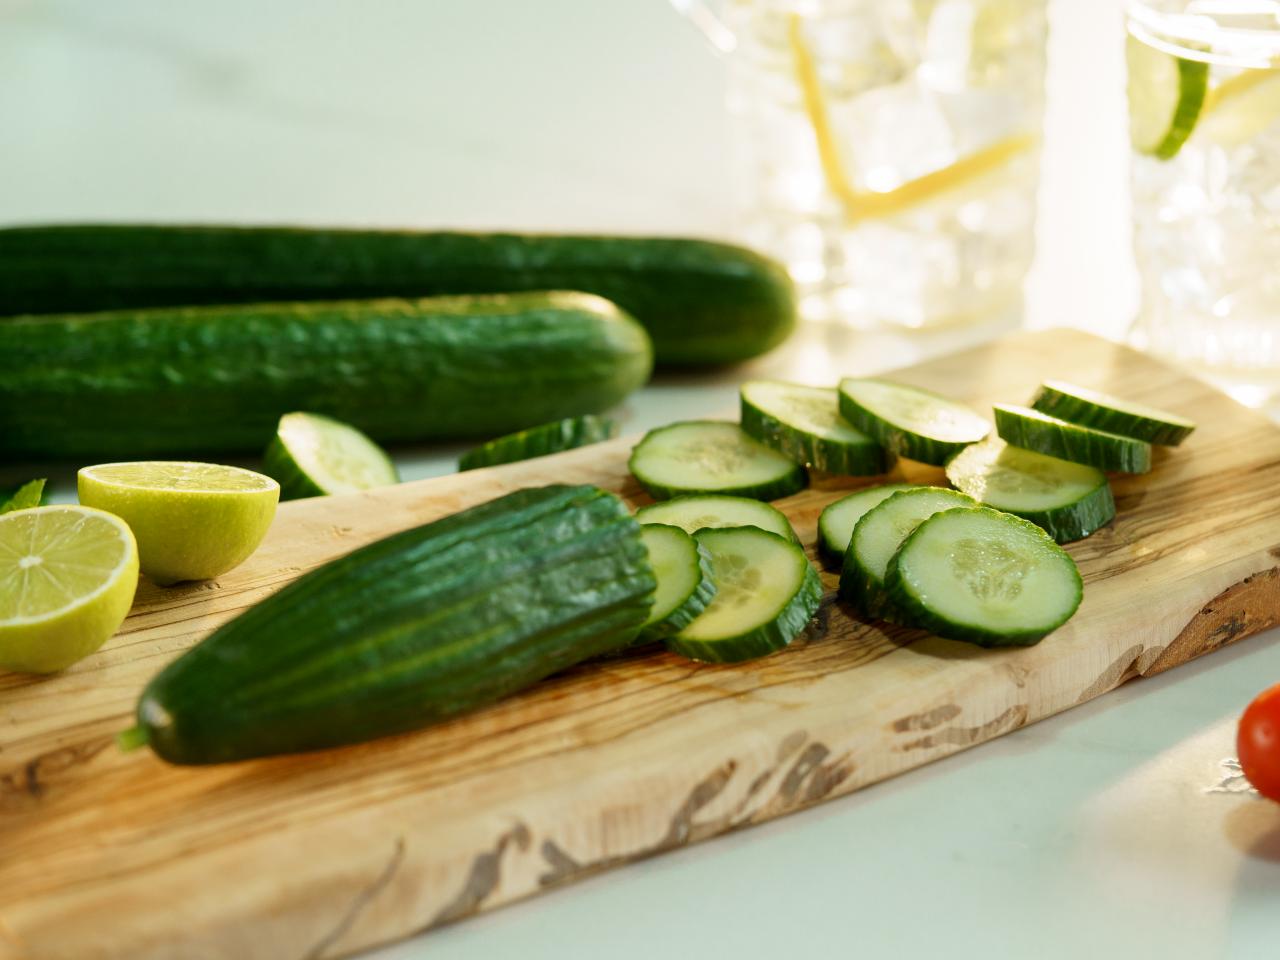 How to Store Cucumbers So They Last for Weeks